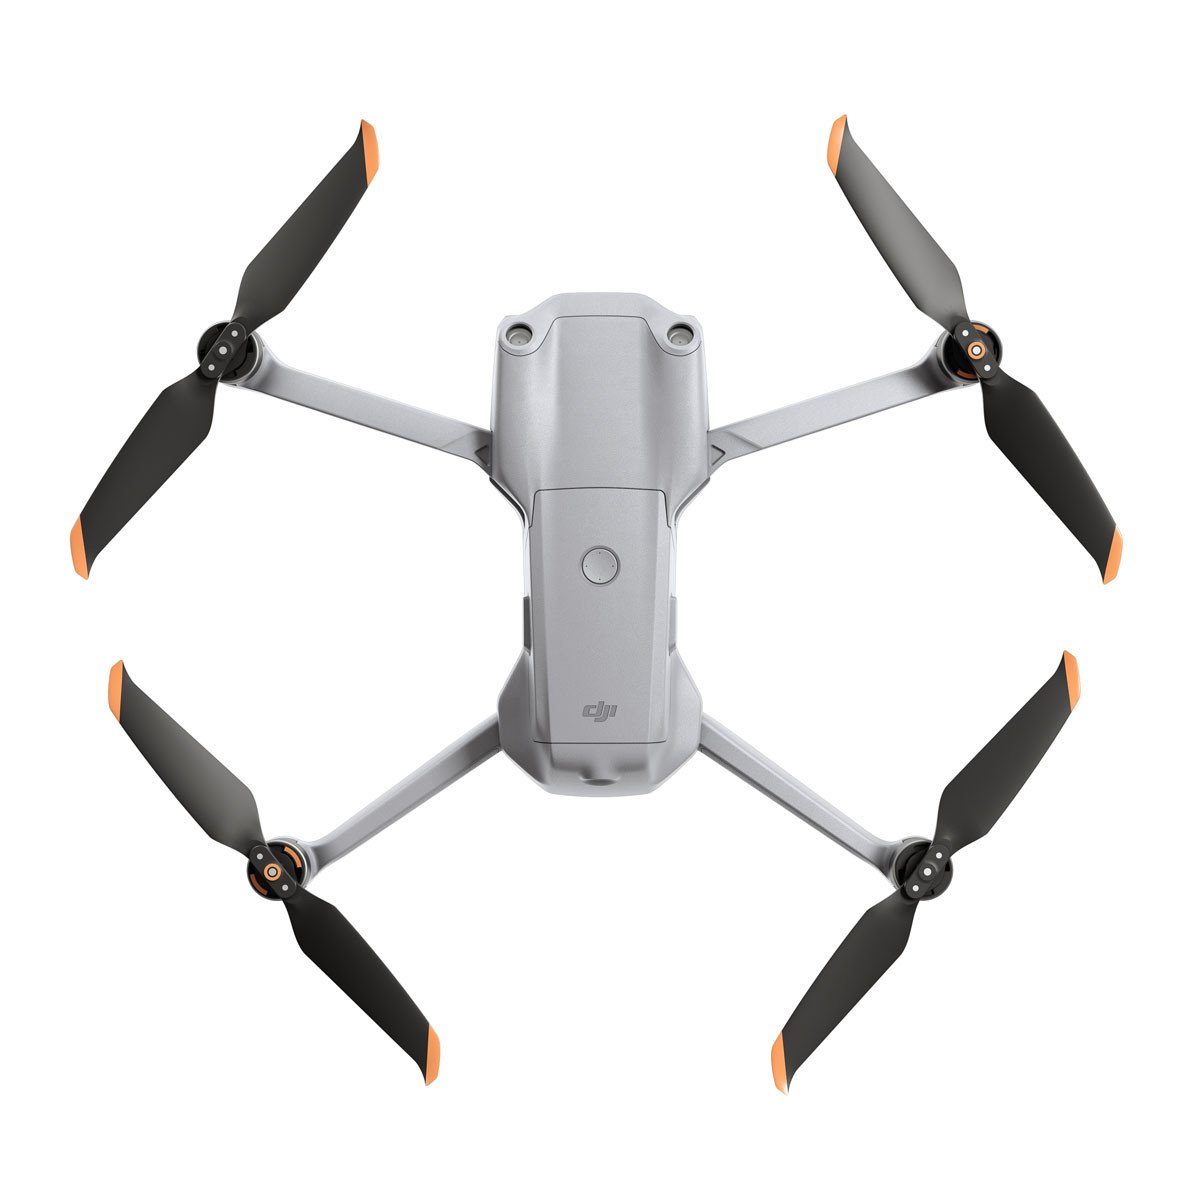 DJI Air 2S, Drone Quadcopter UAV with 3-Axis Gimbal Camera, 5.4K Video,  1-Inch CMOS Sensor, 4 Directions of Obstacle Sensing, 31 Mins Flight Time